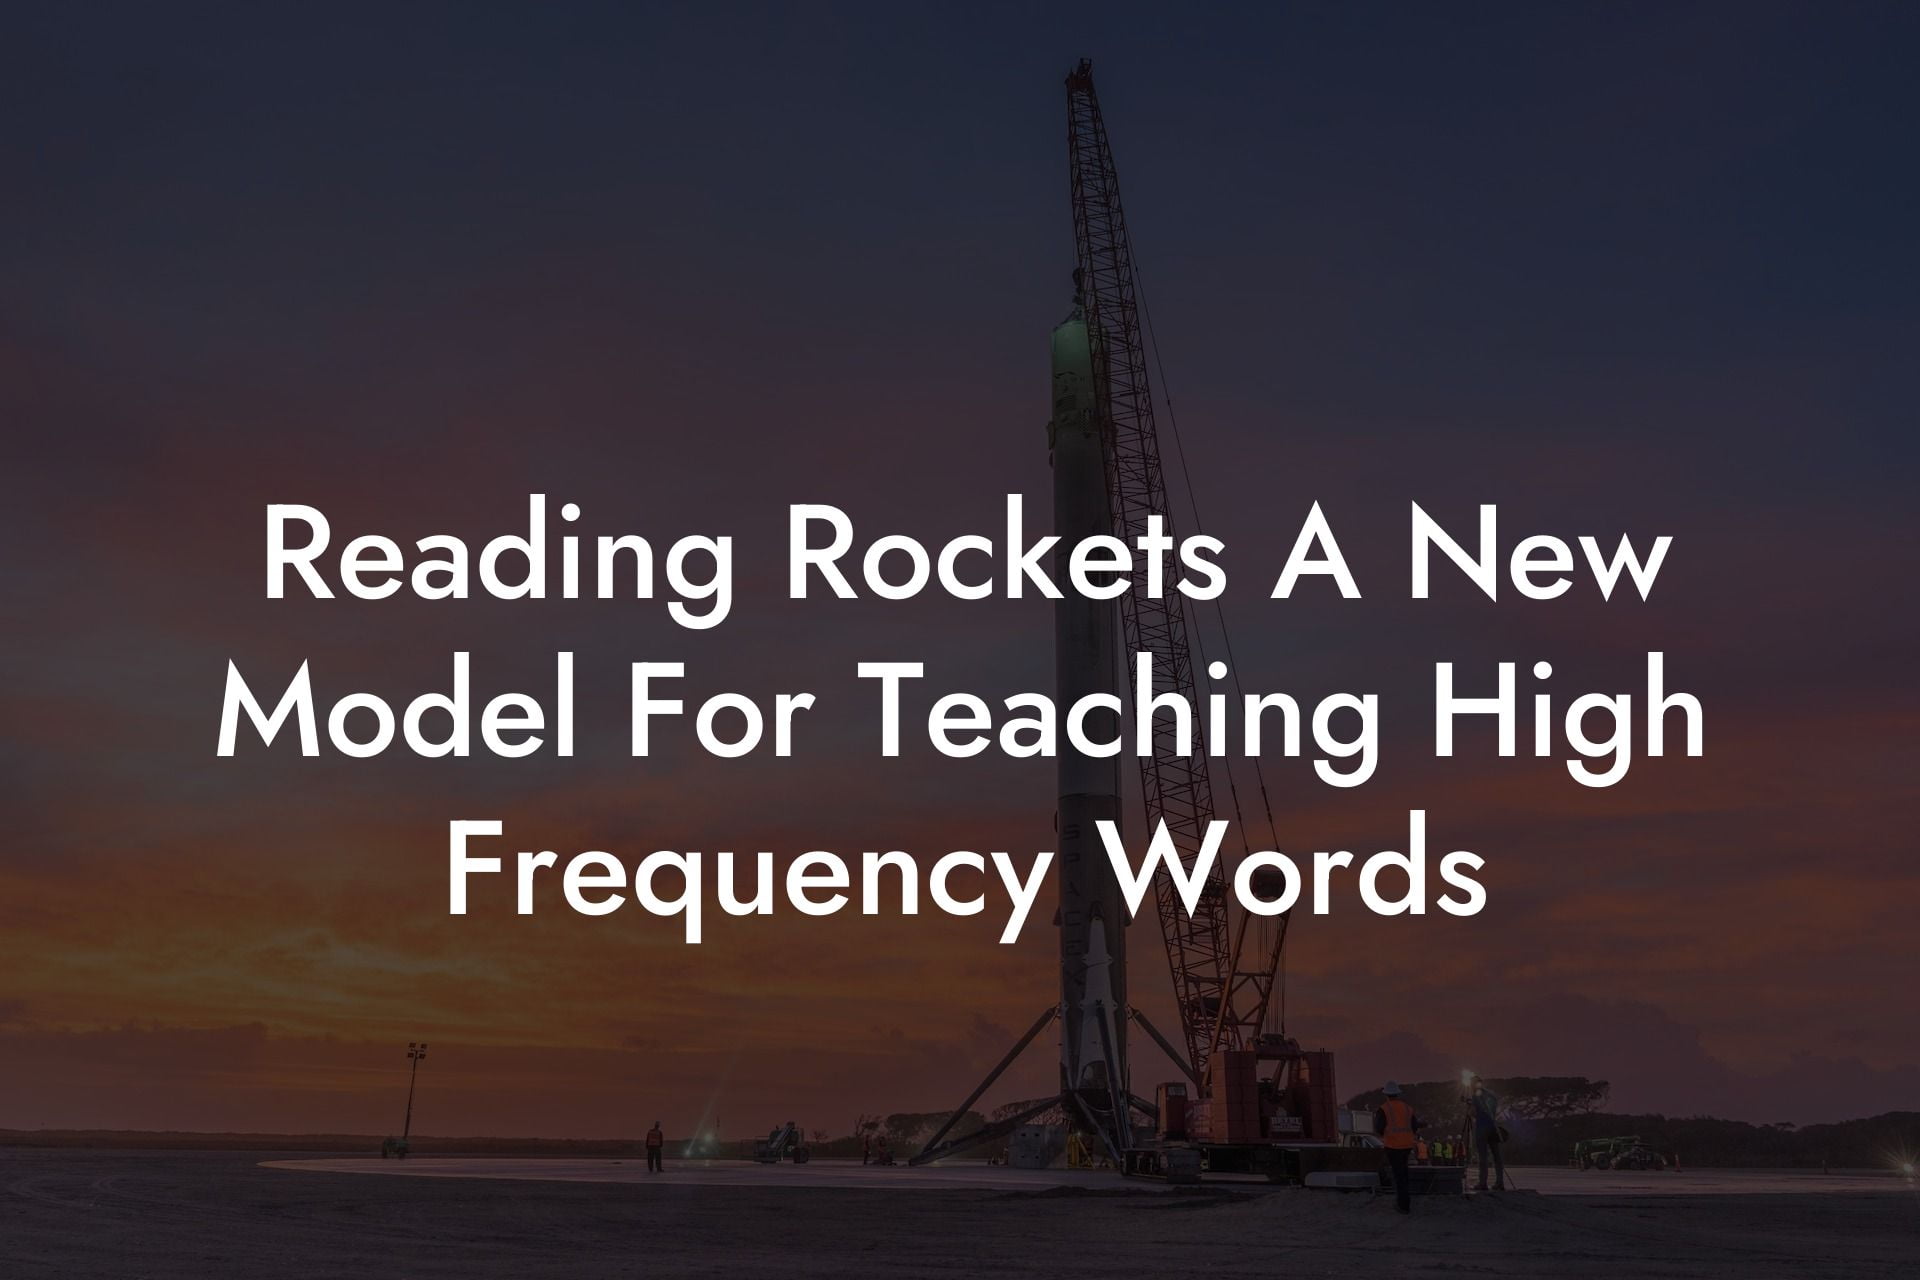 Reading Rockets A New Model For Teaching High Frequency Words